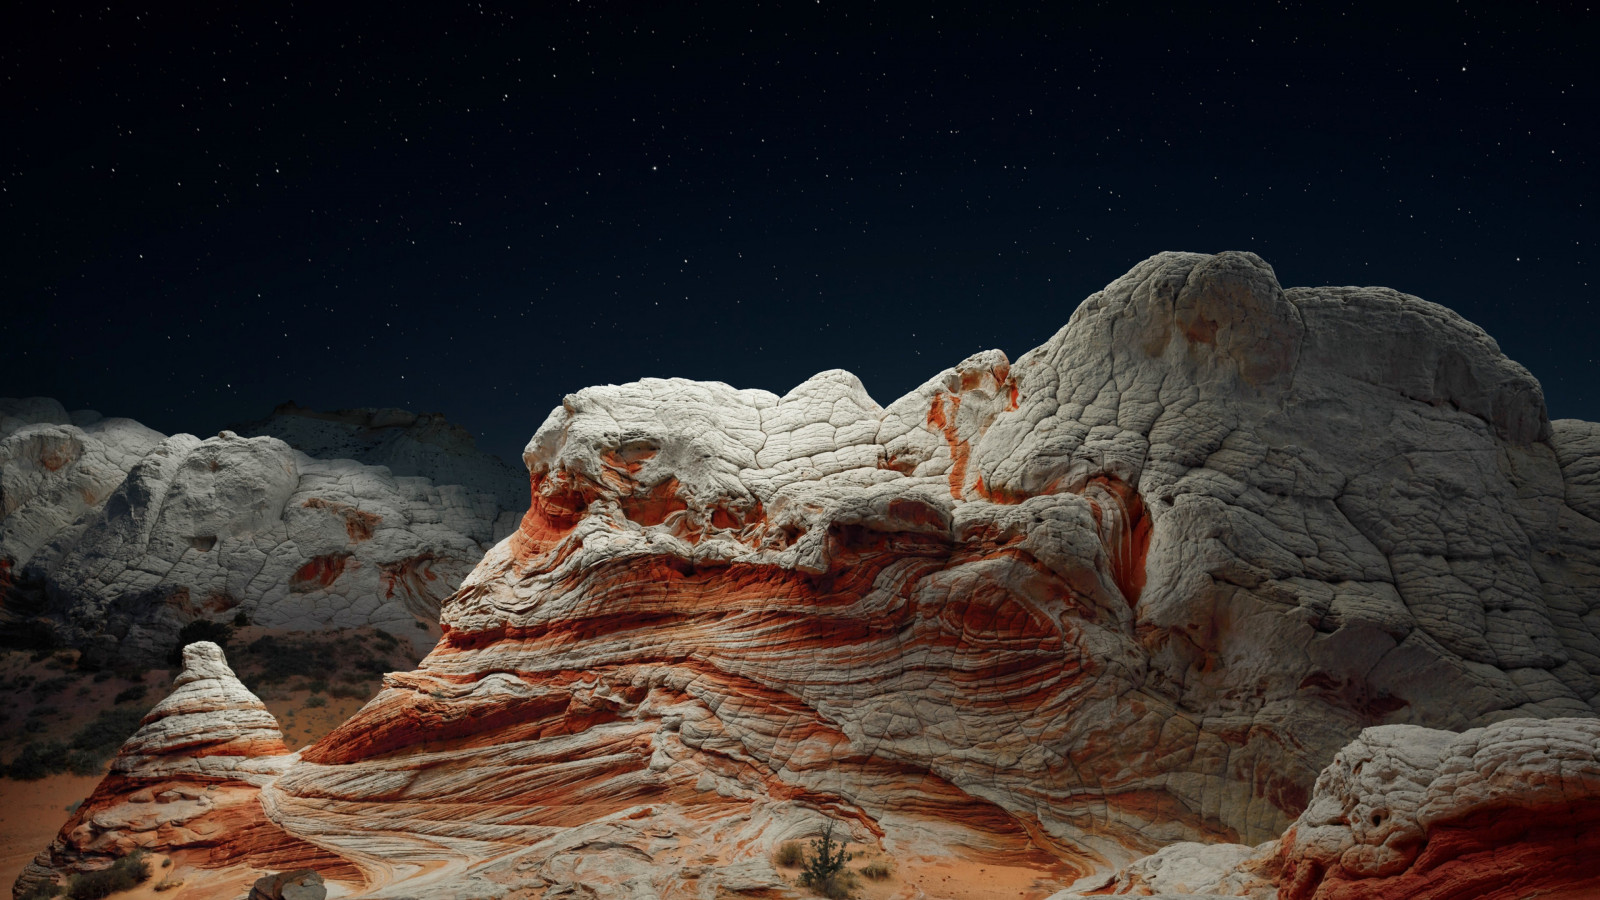 The night sky and desert valley wallpaper 1600x900